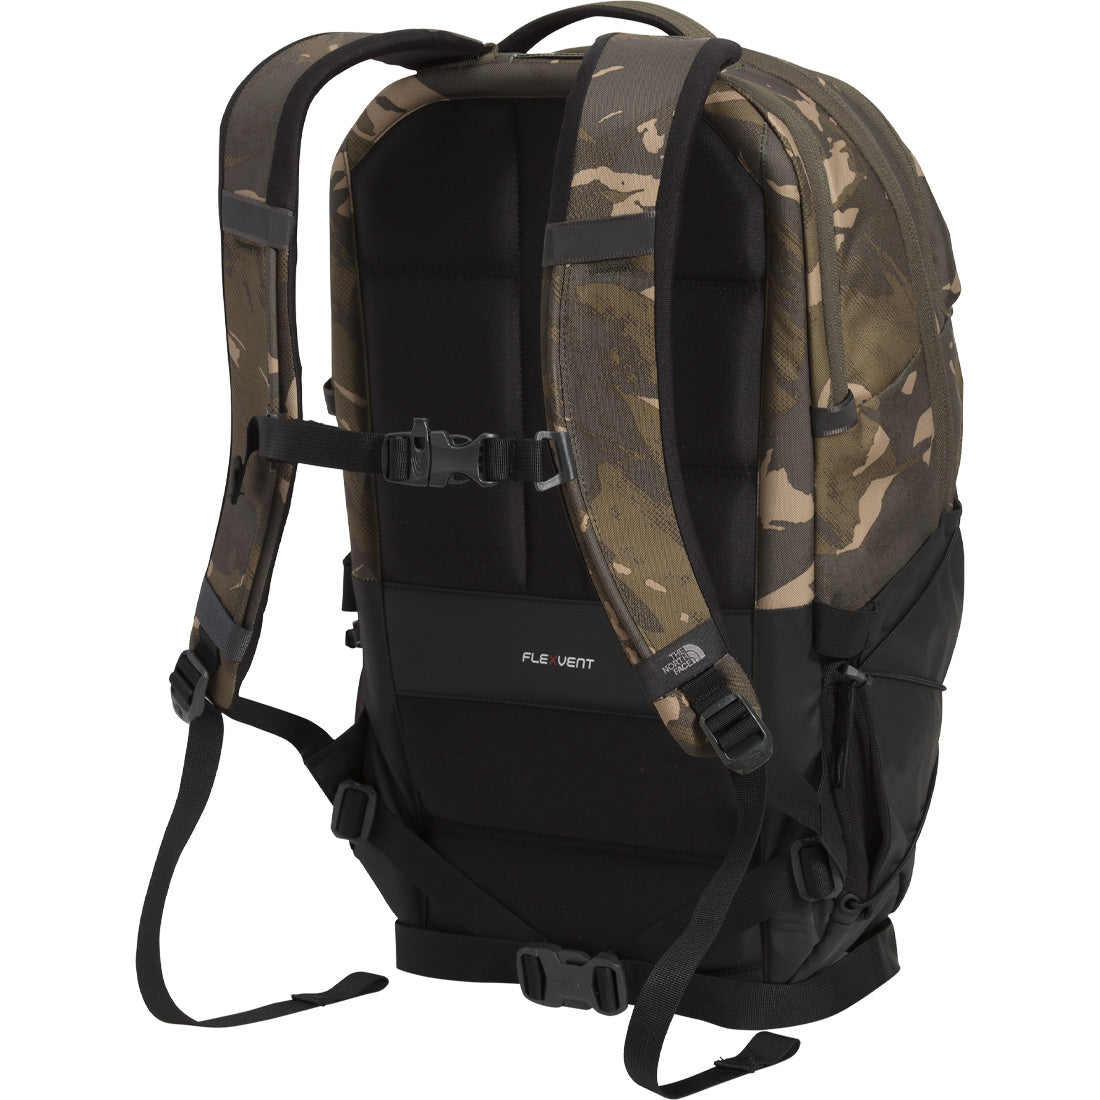 The North Face Borealis Backpack - Men's